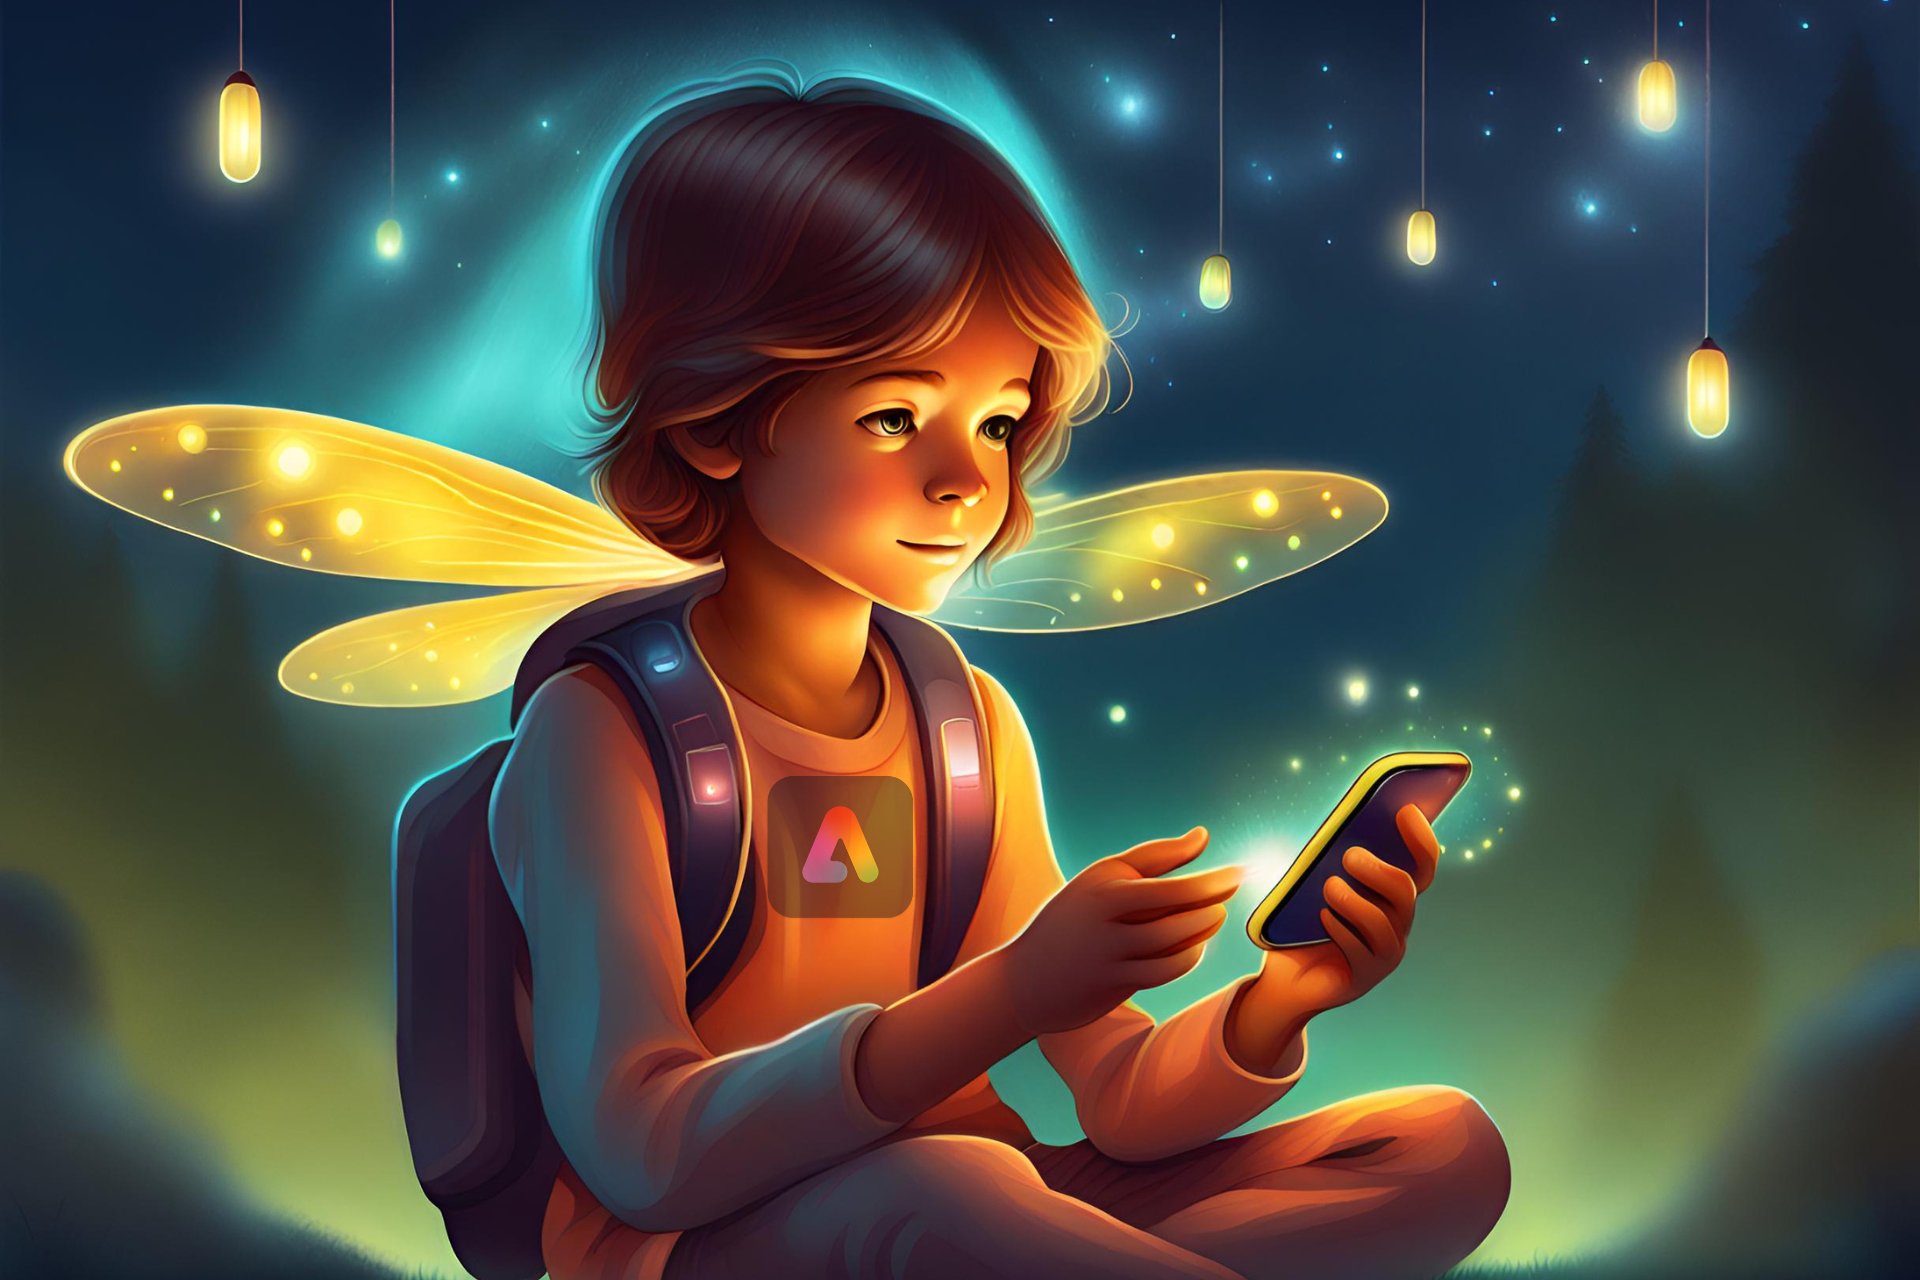 Adobe Express App used by a child holding a phone